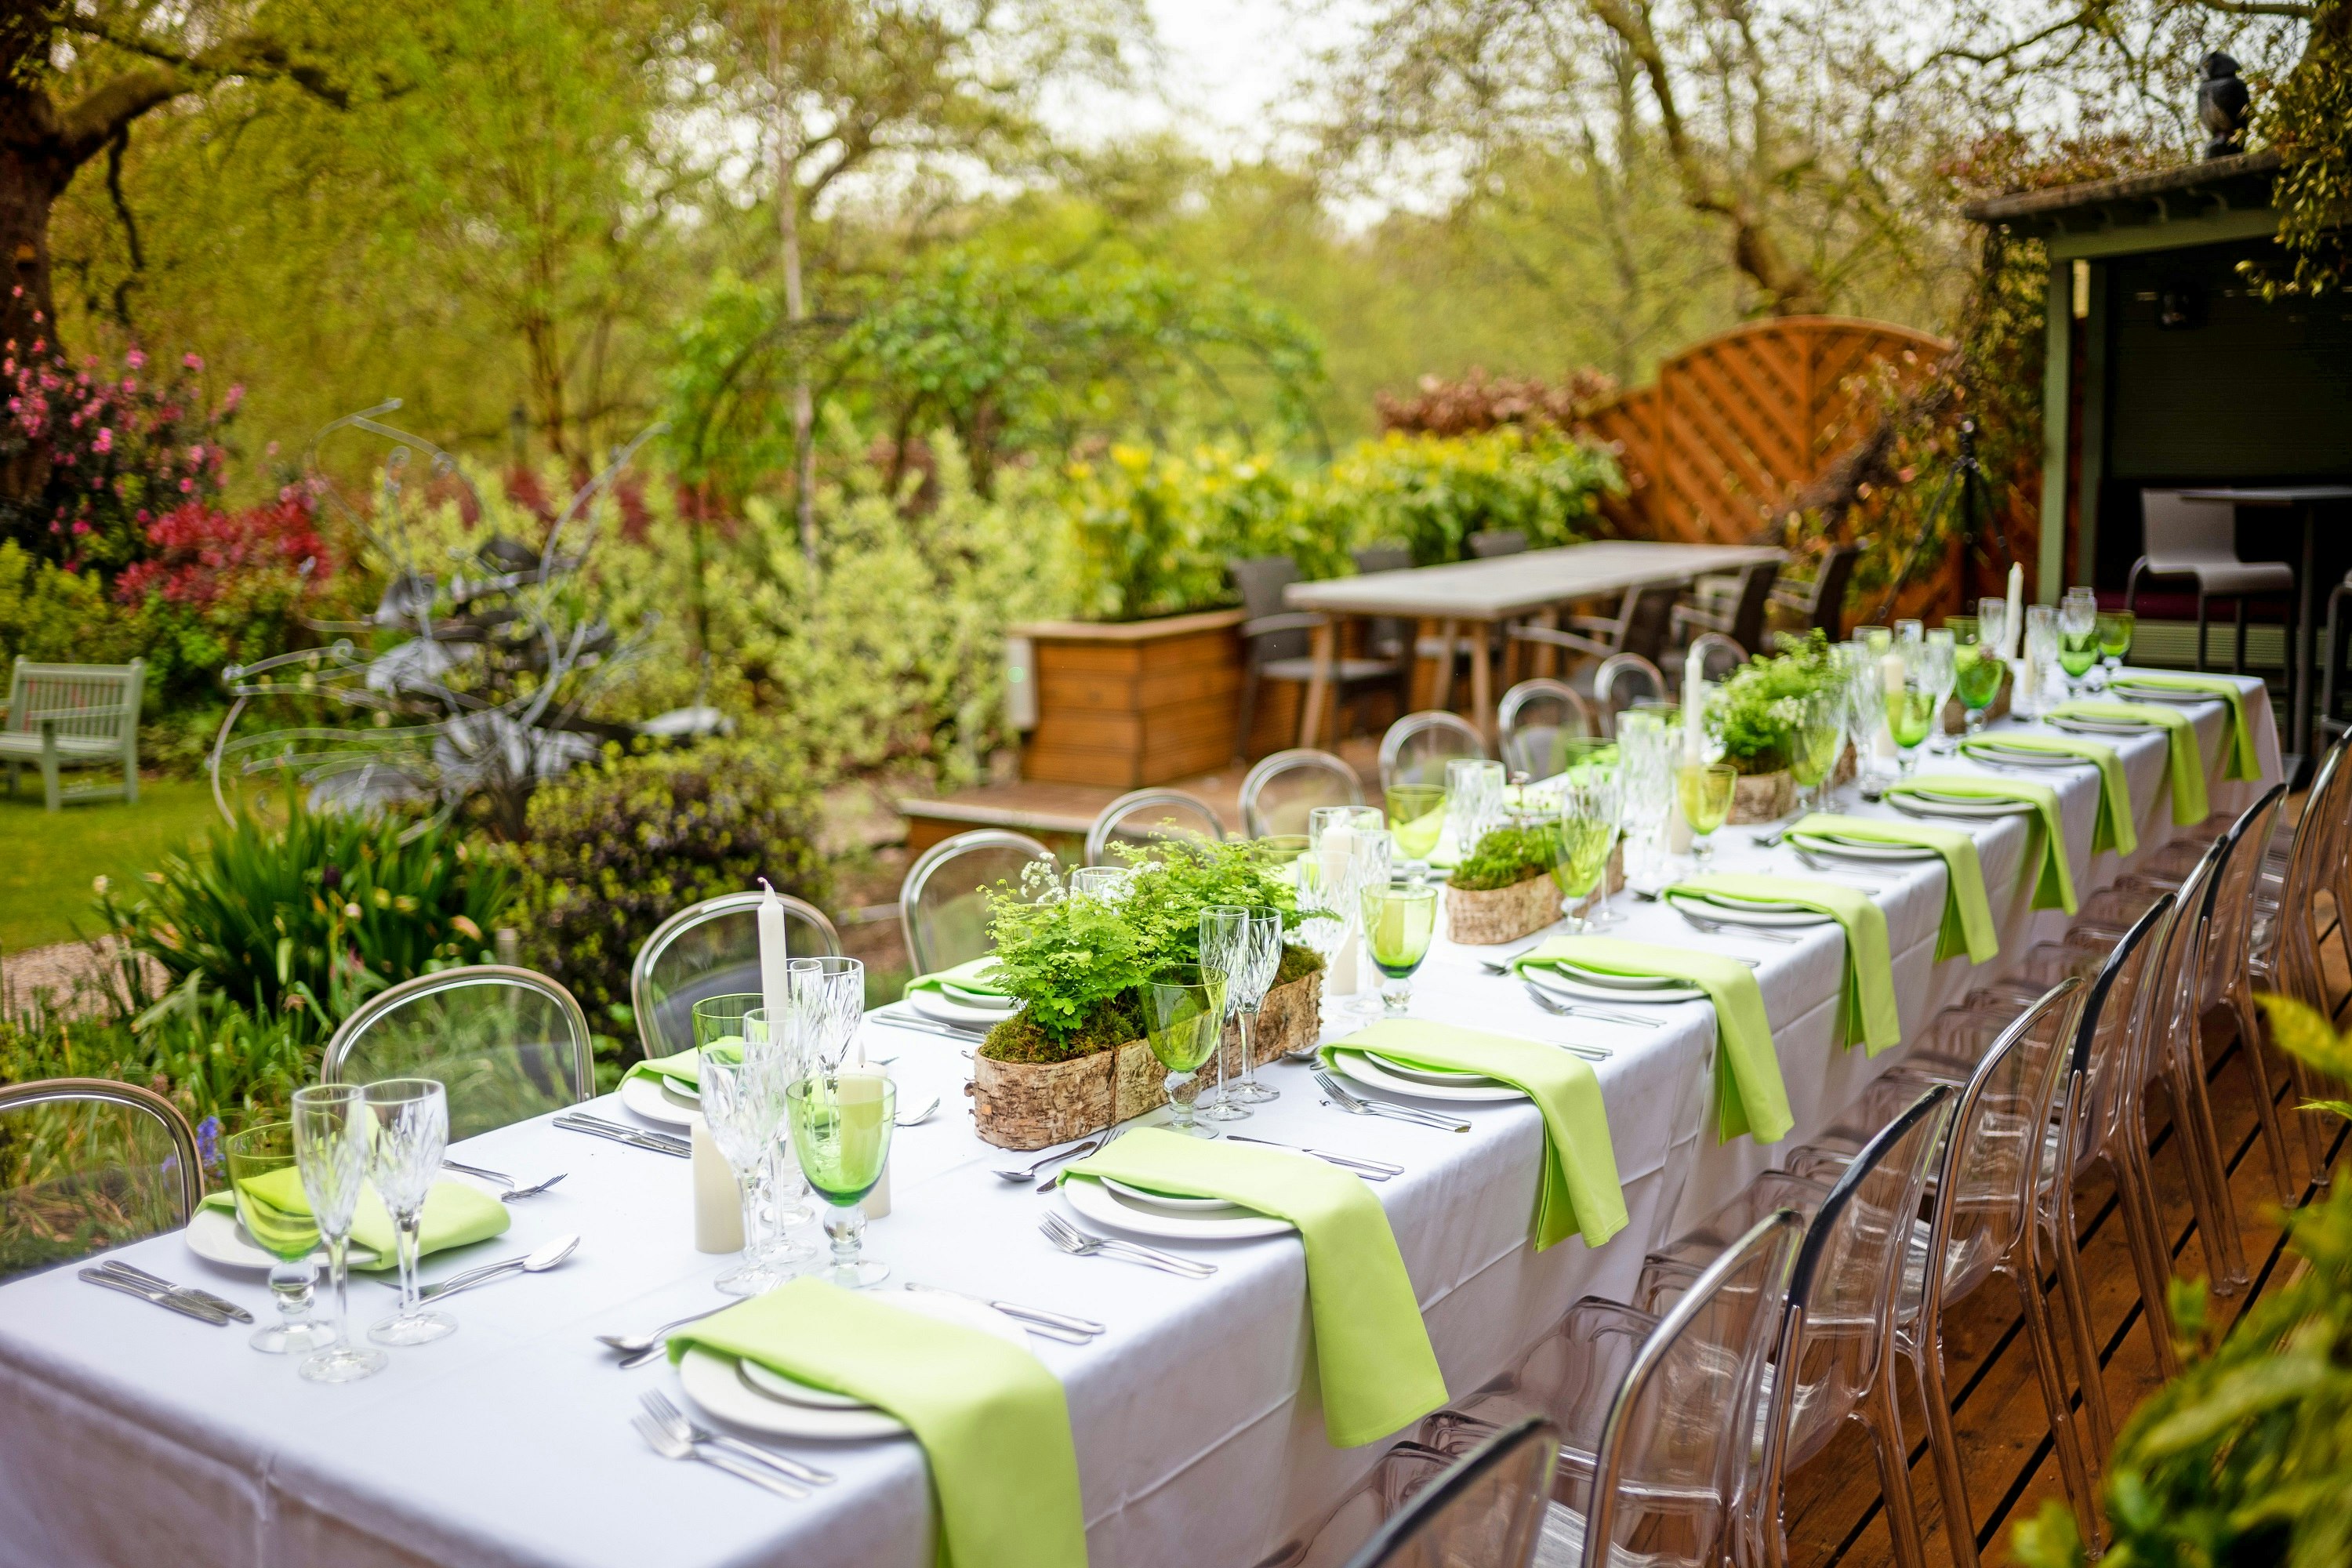 Outdoor Birthday Party Venues in London - Six Park Place (Home of the Royal Over-Seas League)